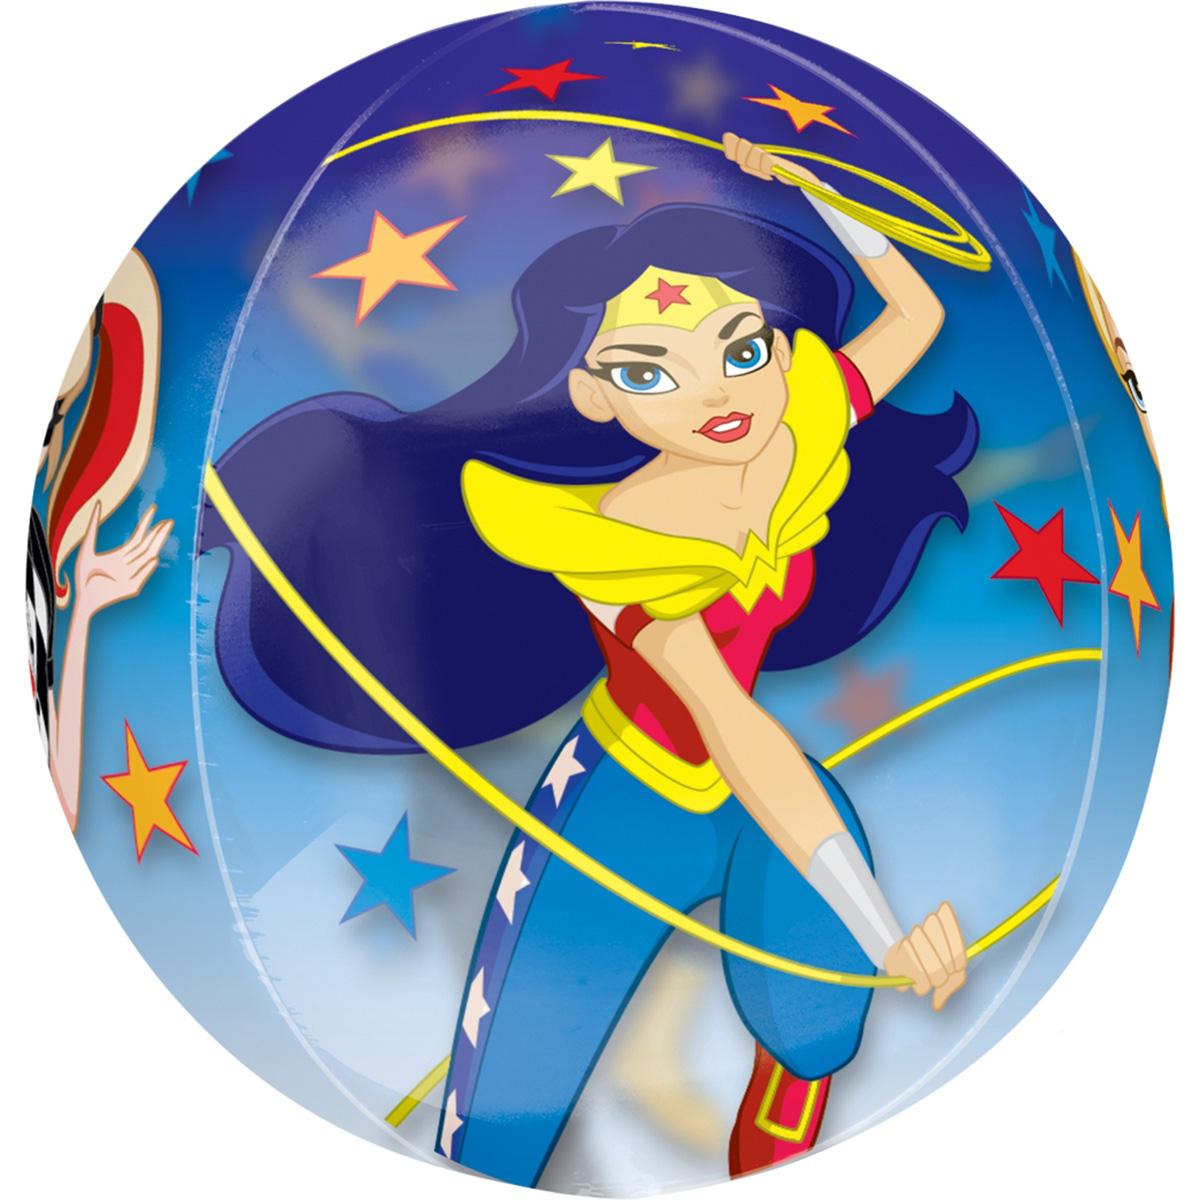 DC Super Hero Girls Orbz Clear Balloon 38x40cm Balloons & Streamers - Party Centre